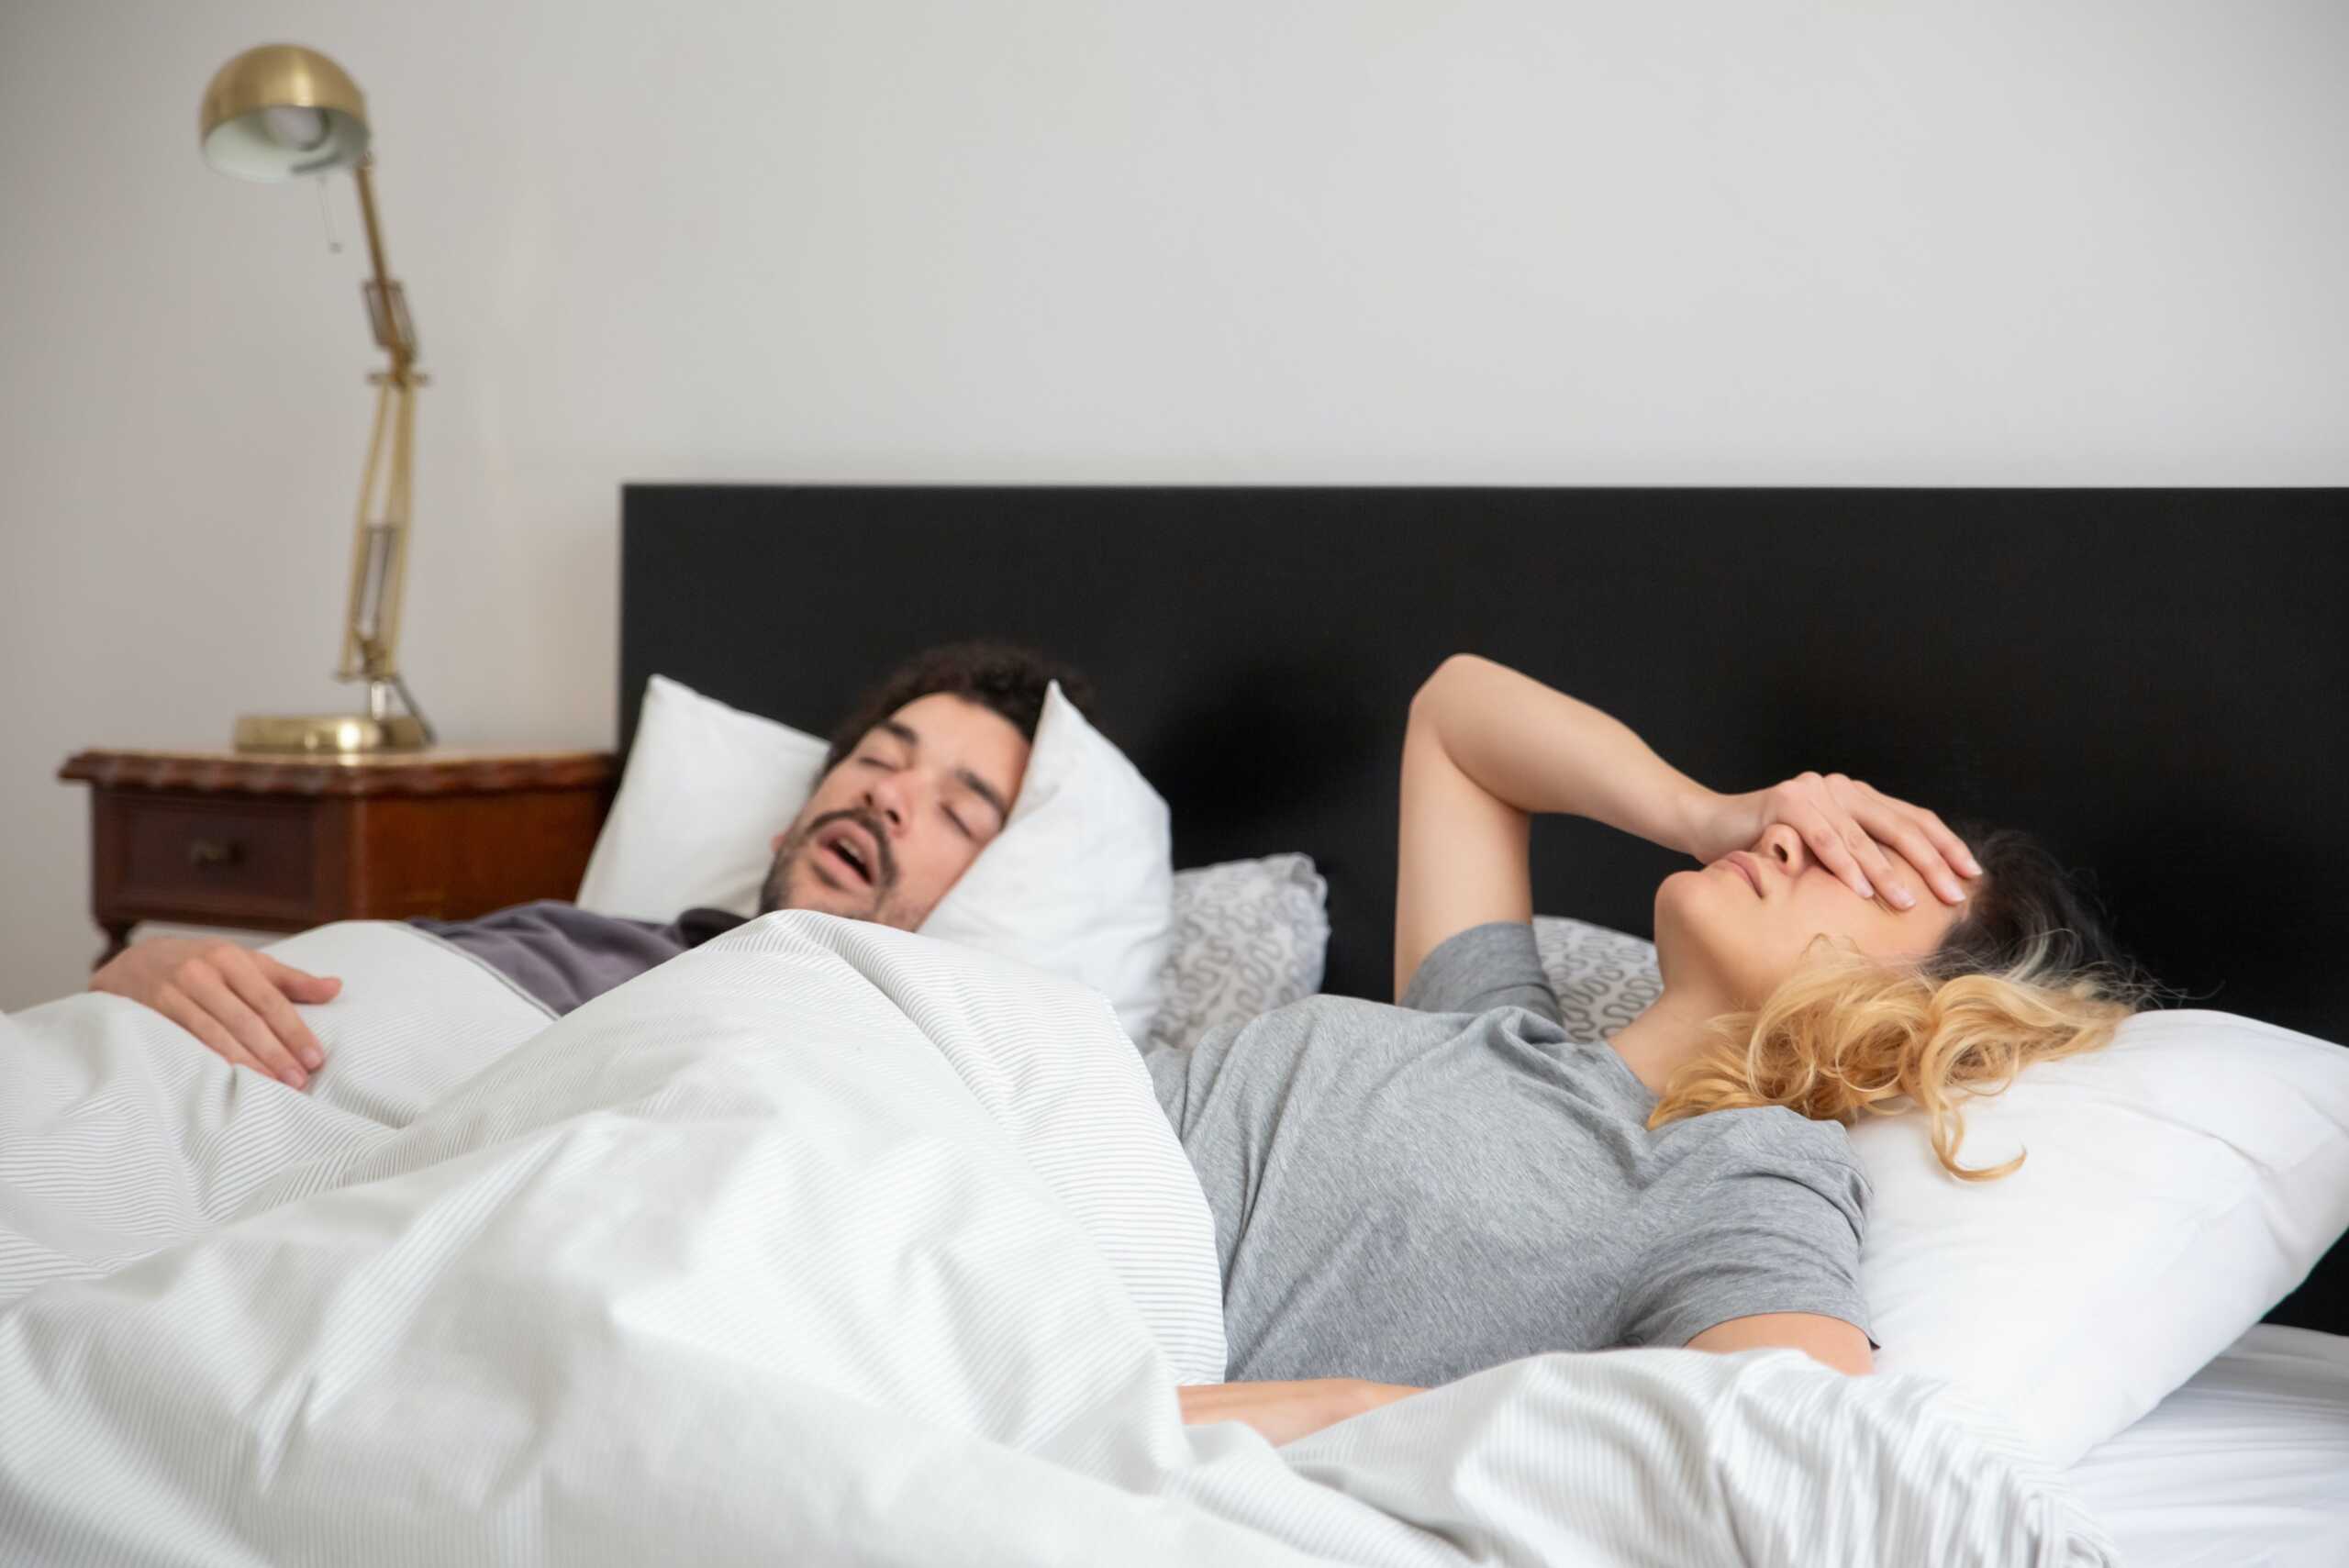 For Better Or For Worse: 5 Ways You're (Probably) Annoying Your Partner